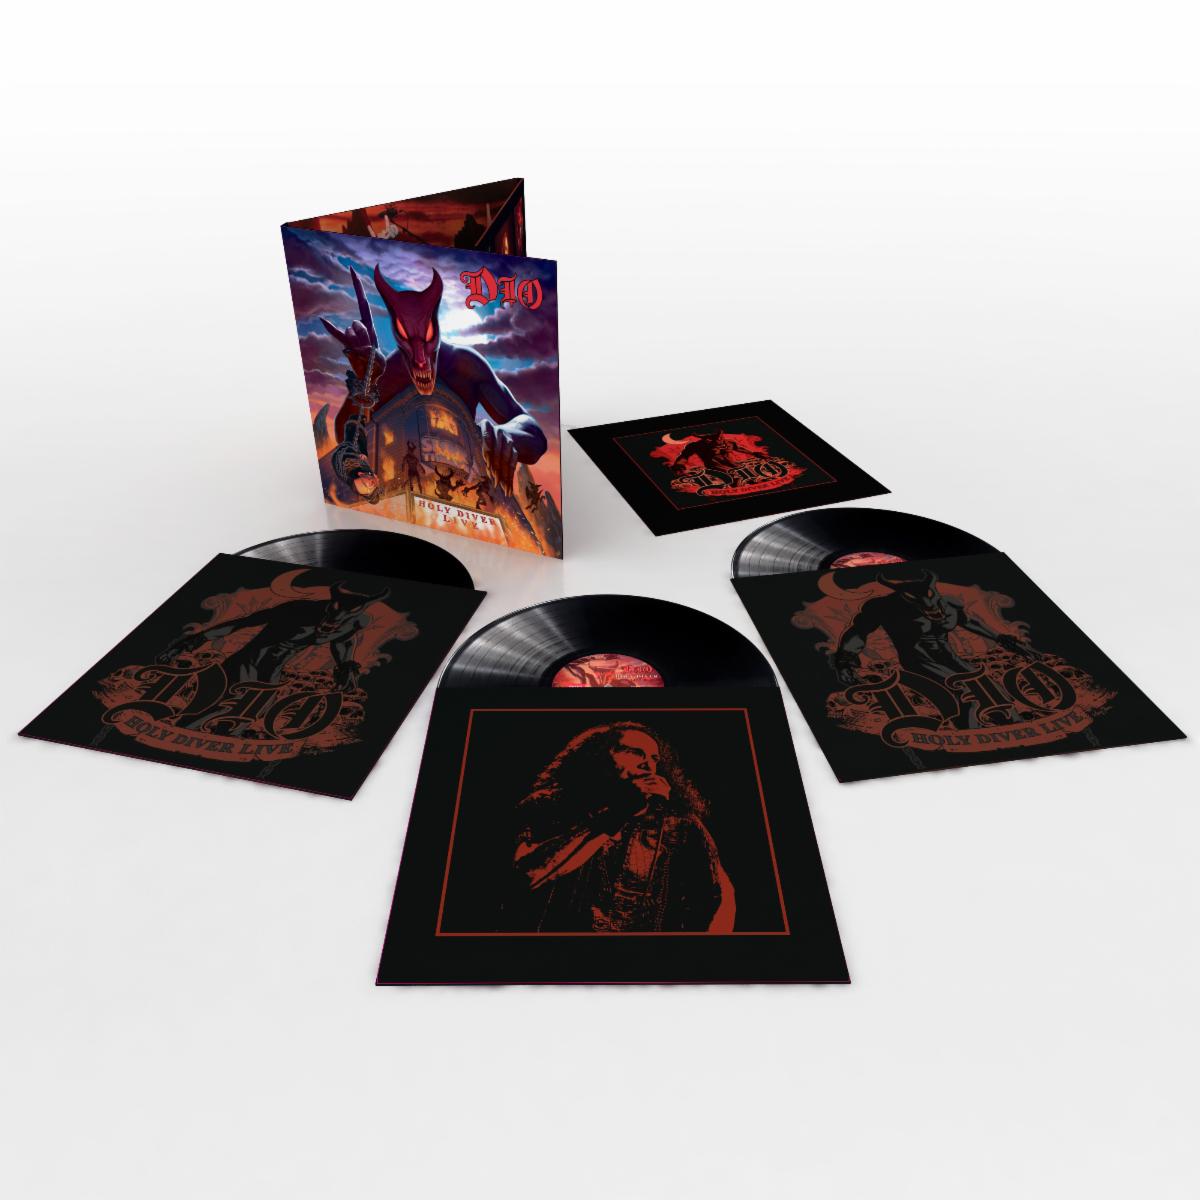 DIO’s Evil Or Divine: Live In New York City and Holy Diver Live Available Today via BMG